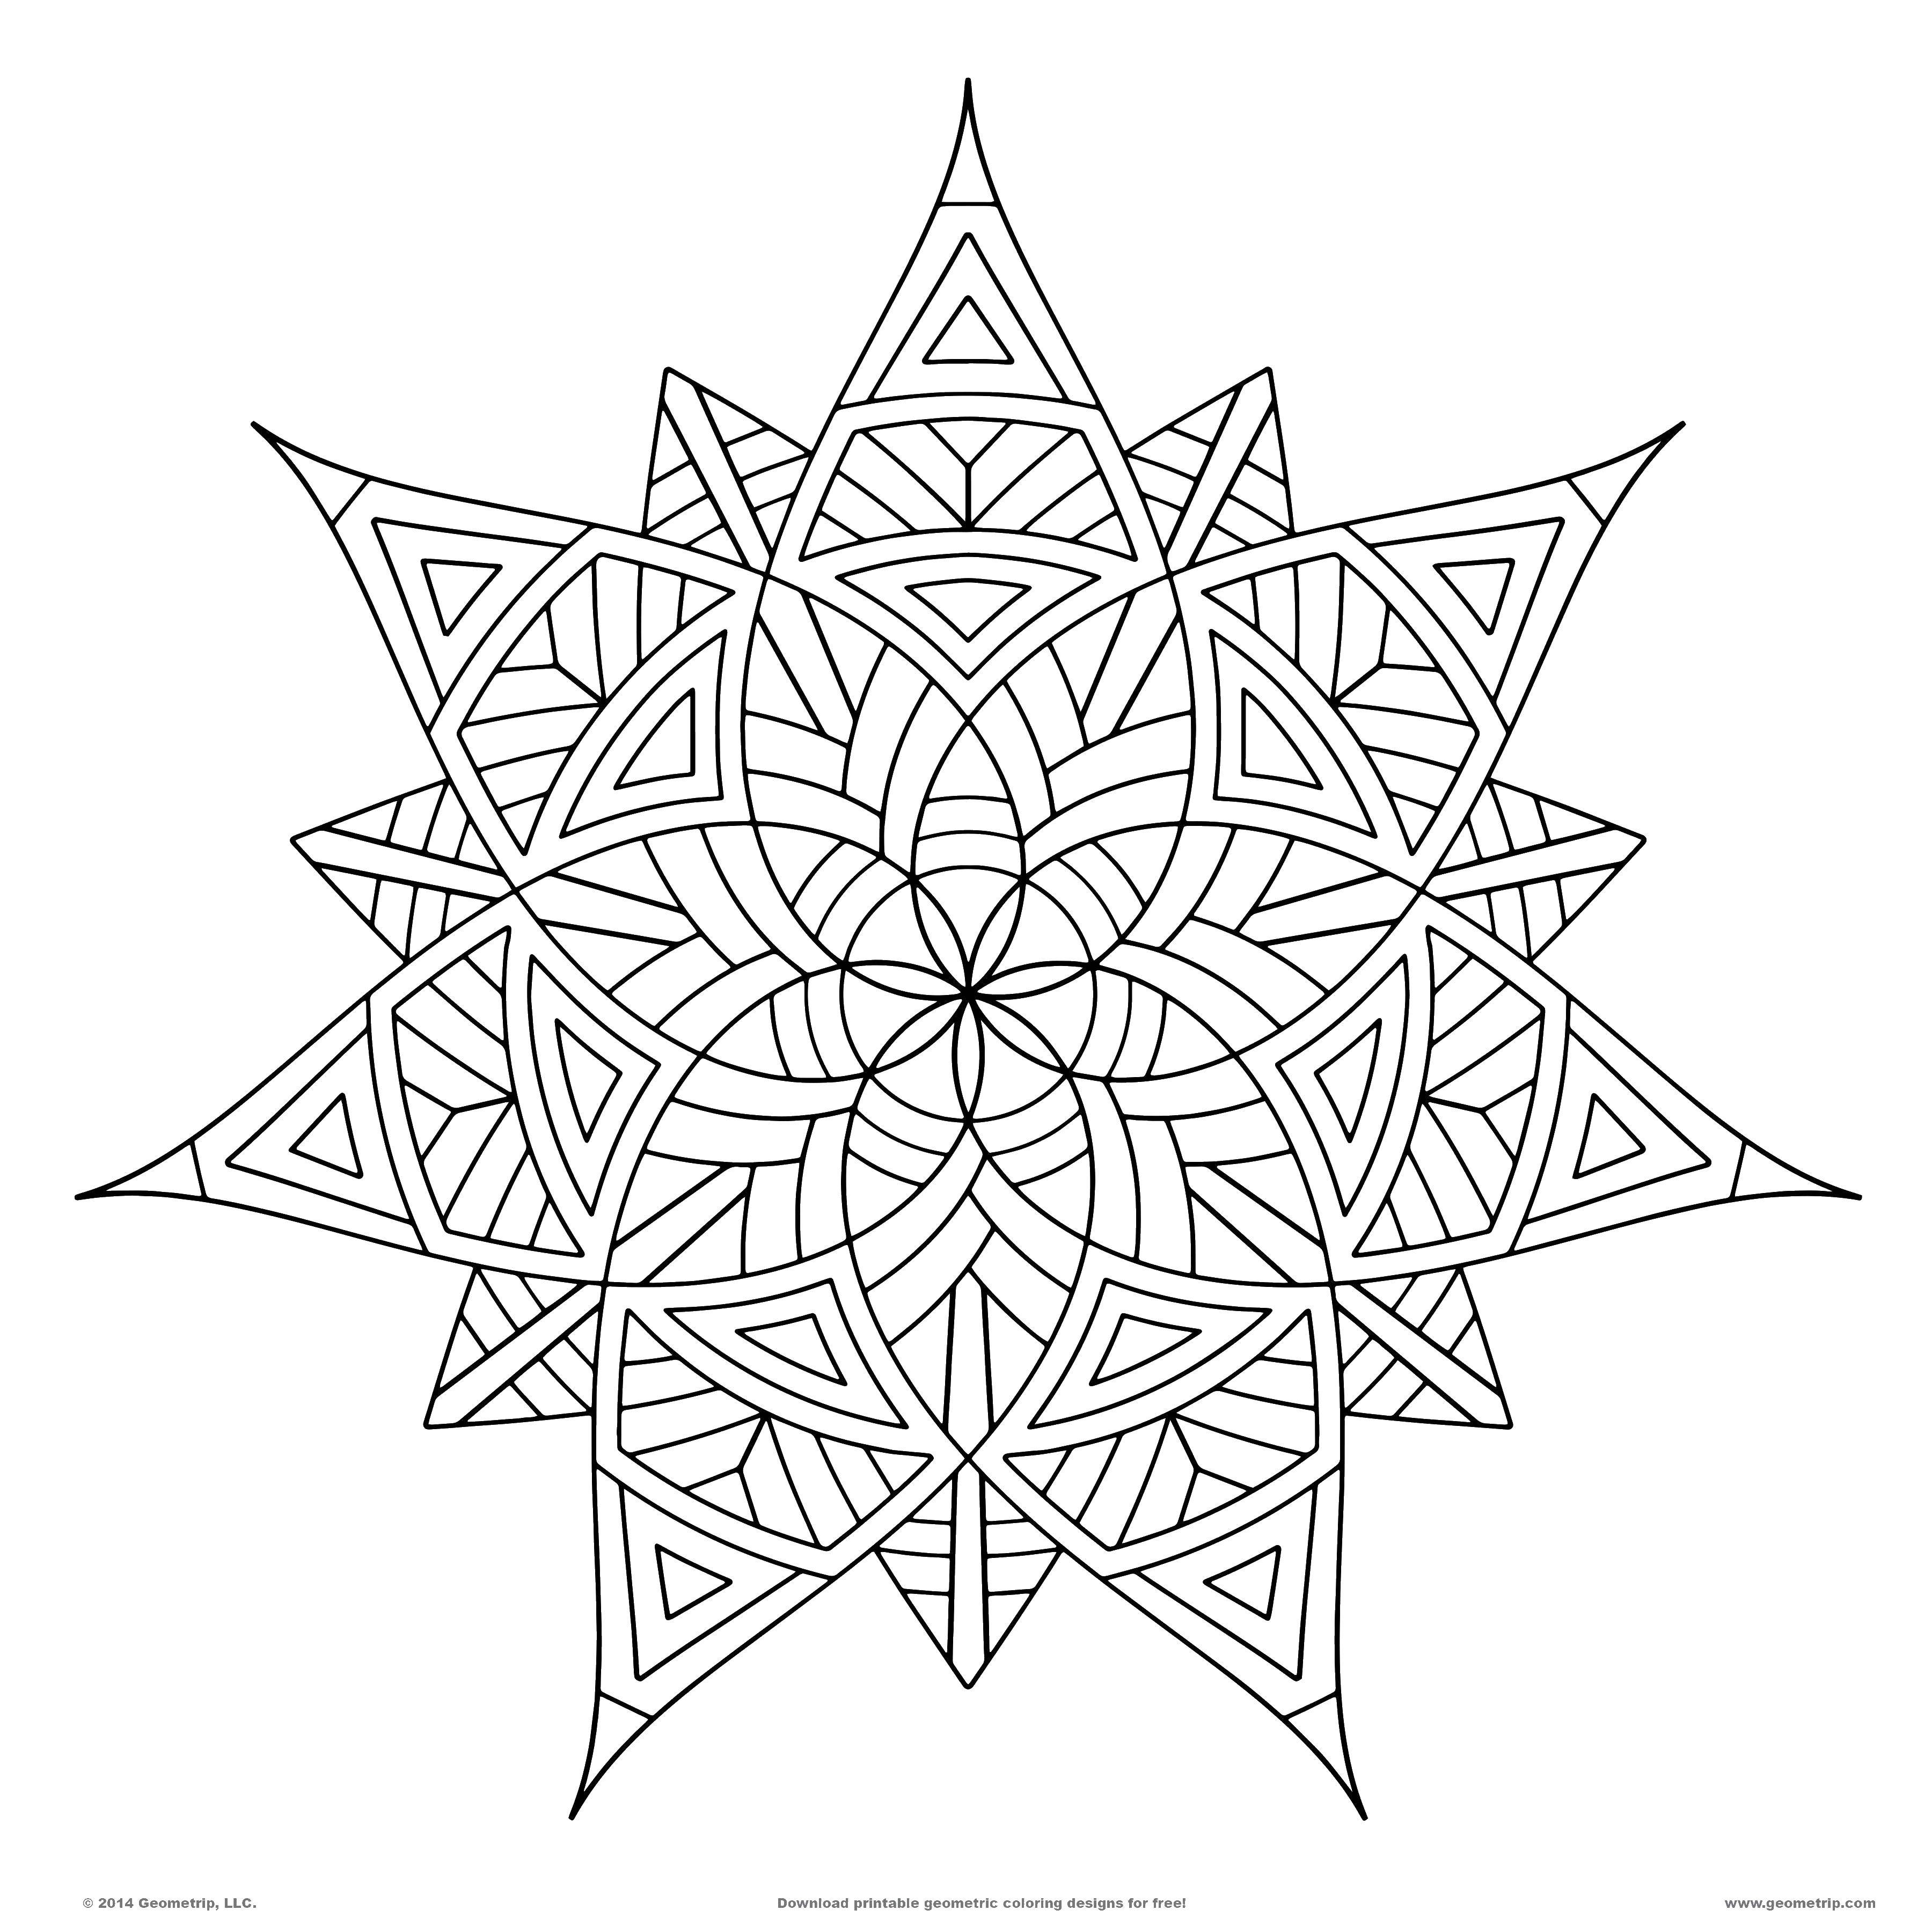 Coloring Flower and geometric patterns. Category Patterns. Tags:  patterns, flower, antistress.